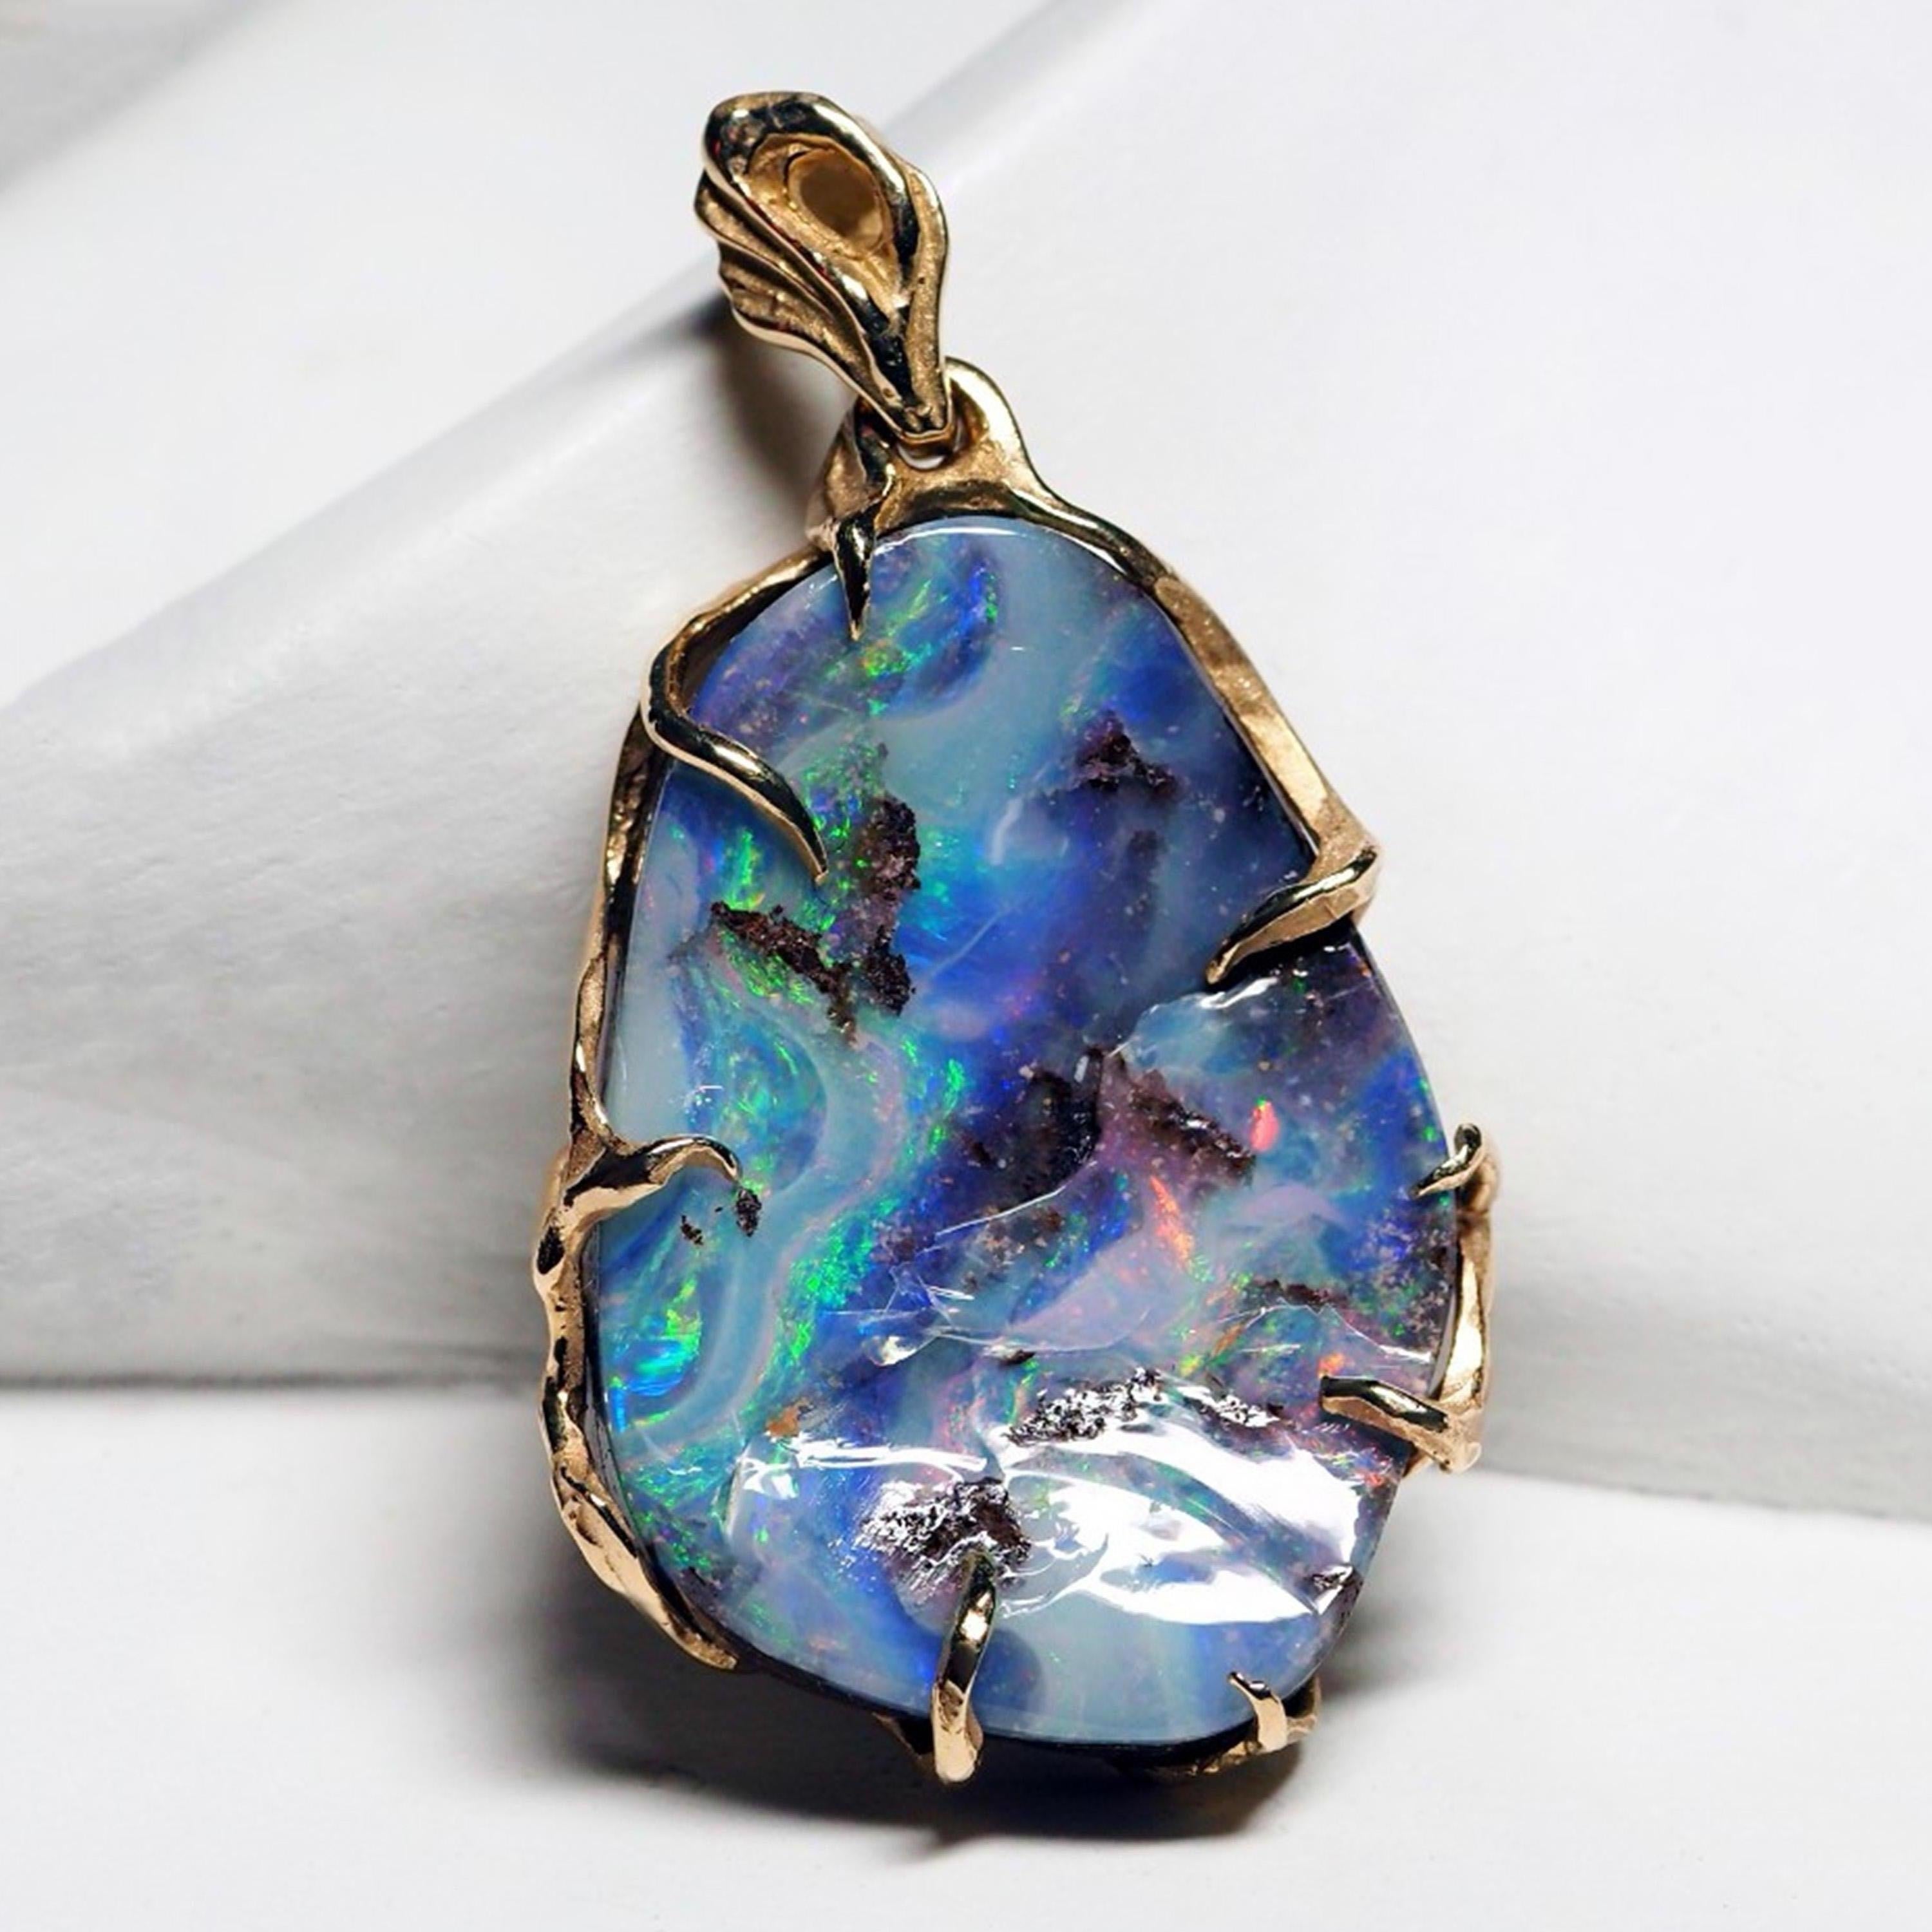 14K yellow gold pendant necklace with Boulder Opal
opal origin - Australia
opal measurements - 0.12 x 0.67 x 1.02 in / 3 x 17 x 26 mm
gemstone weight - 22.25 carats
pendant length - 1.22 in / 31 mm
pendant weight - 7.21 grams


We ship our jewelry